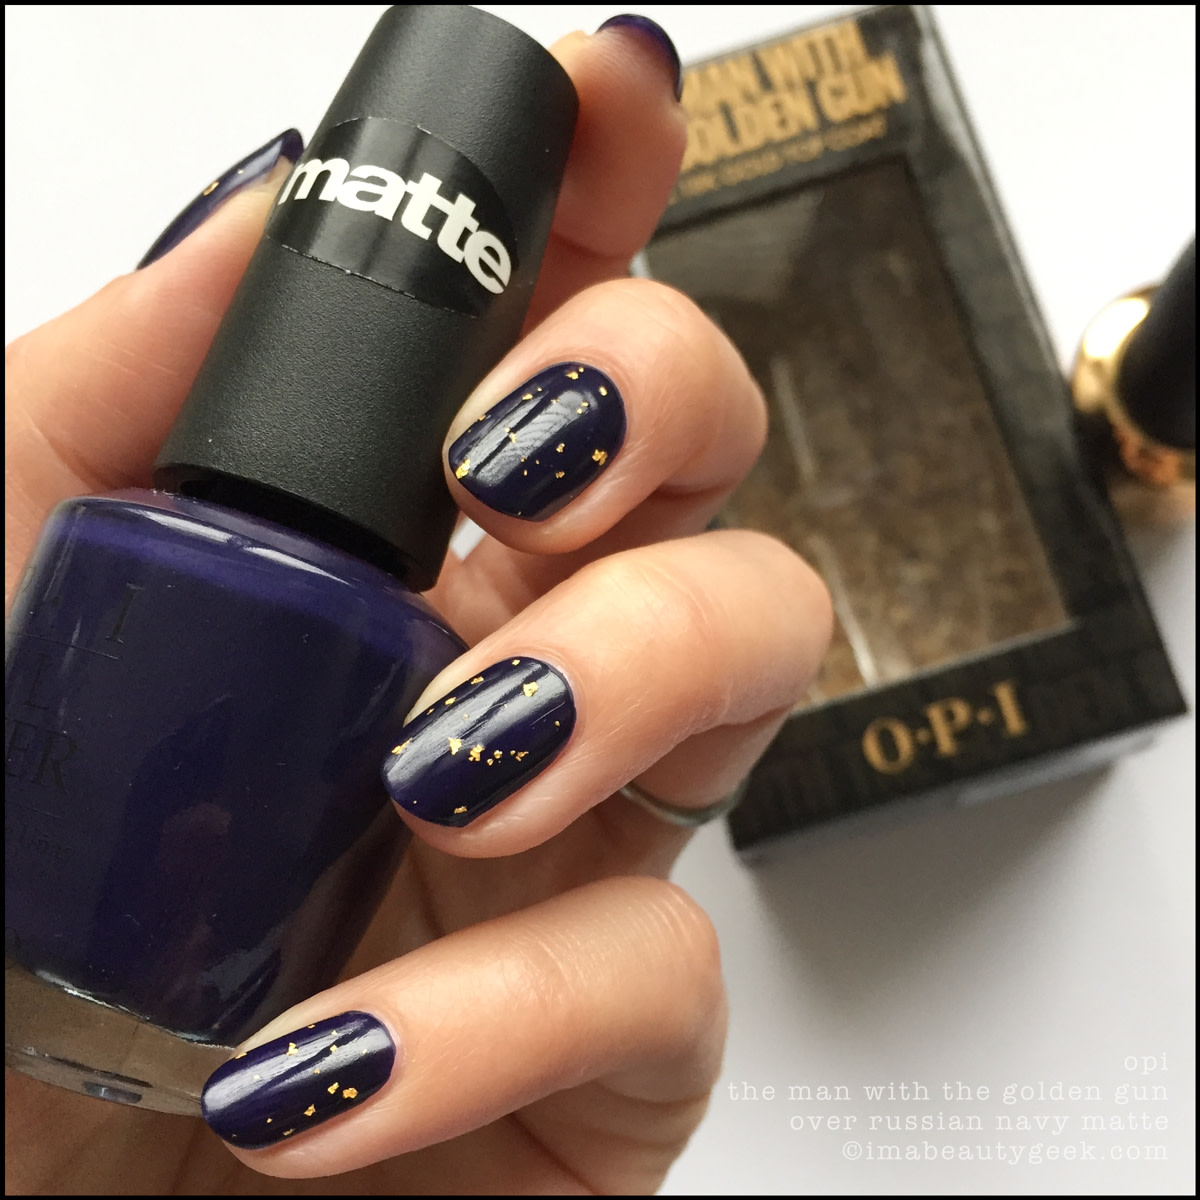 OPI The Man With the Golden Gun over Russian Navy Matte 2009